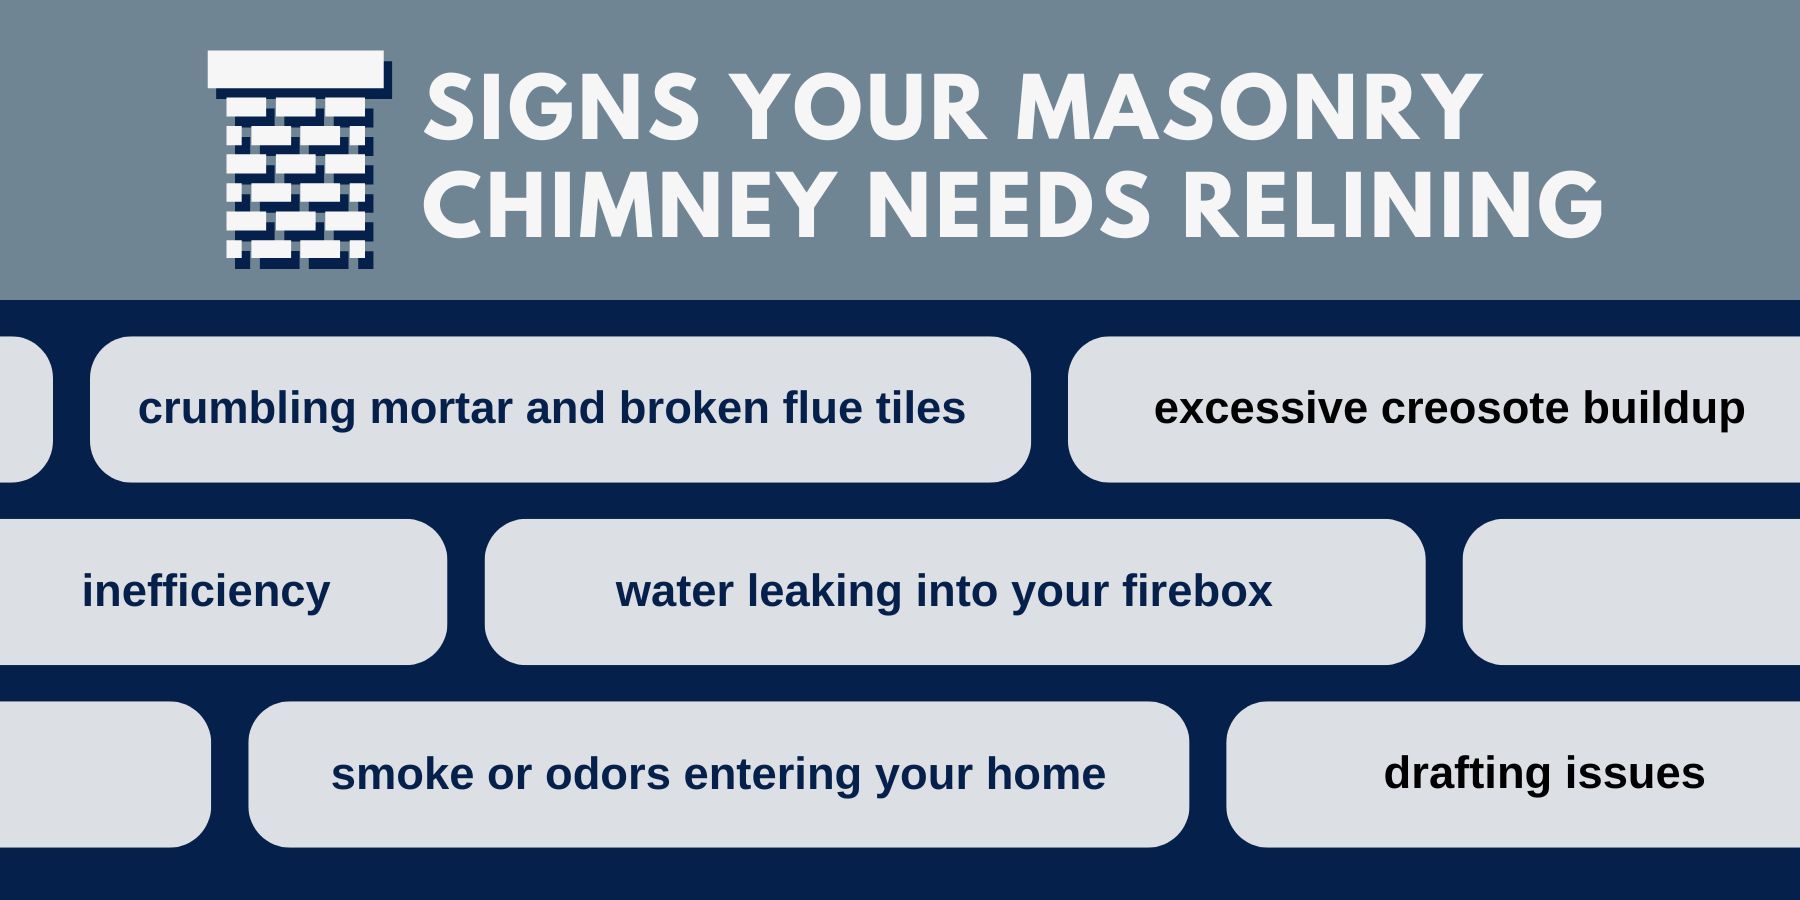 original infographic stating signs your masonry chimney needs relining